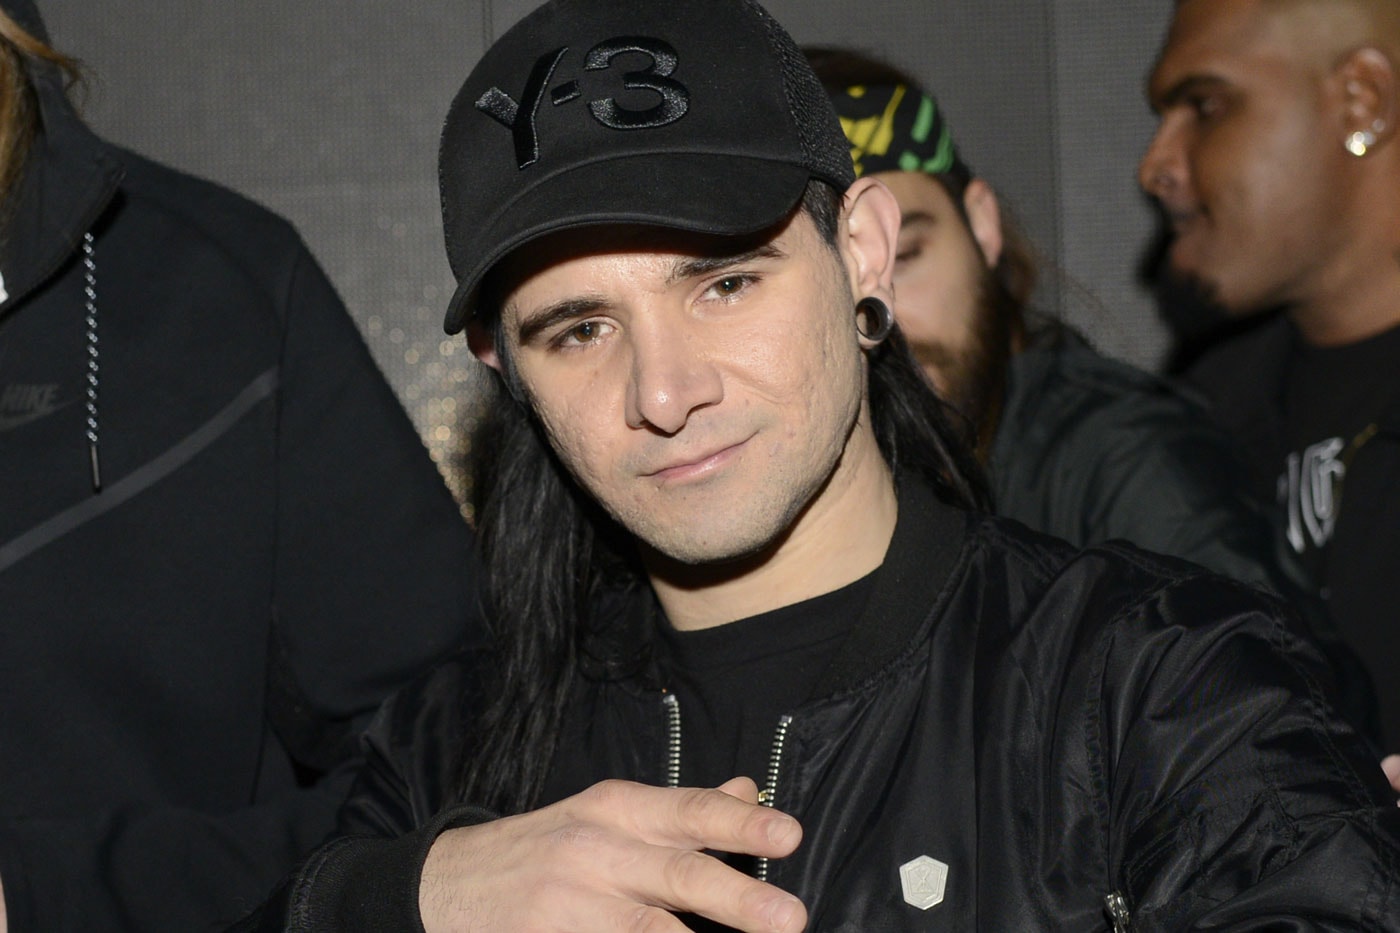 Skrillex Reunites With His Old Emo Band (First To Last) and Releases New Single